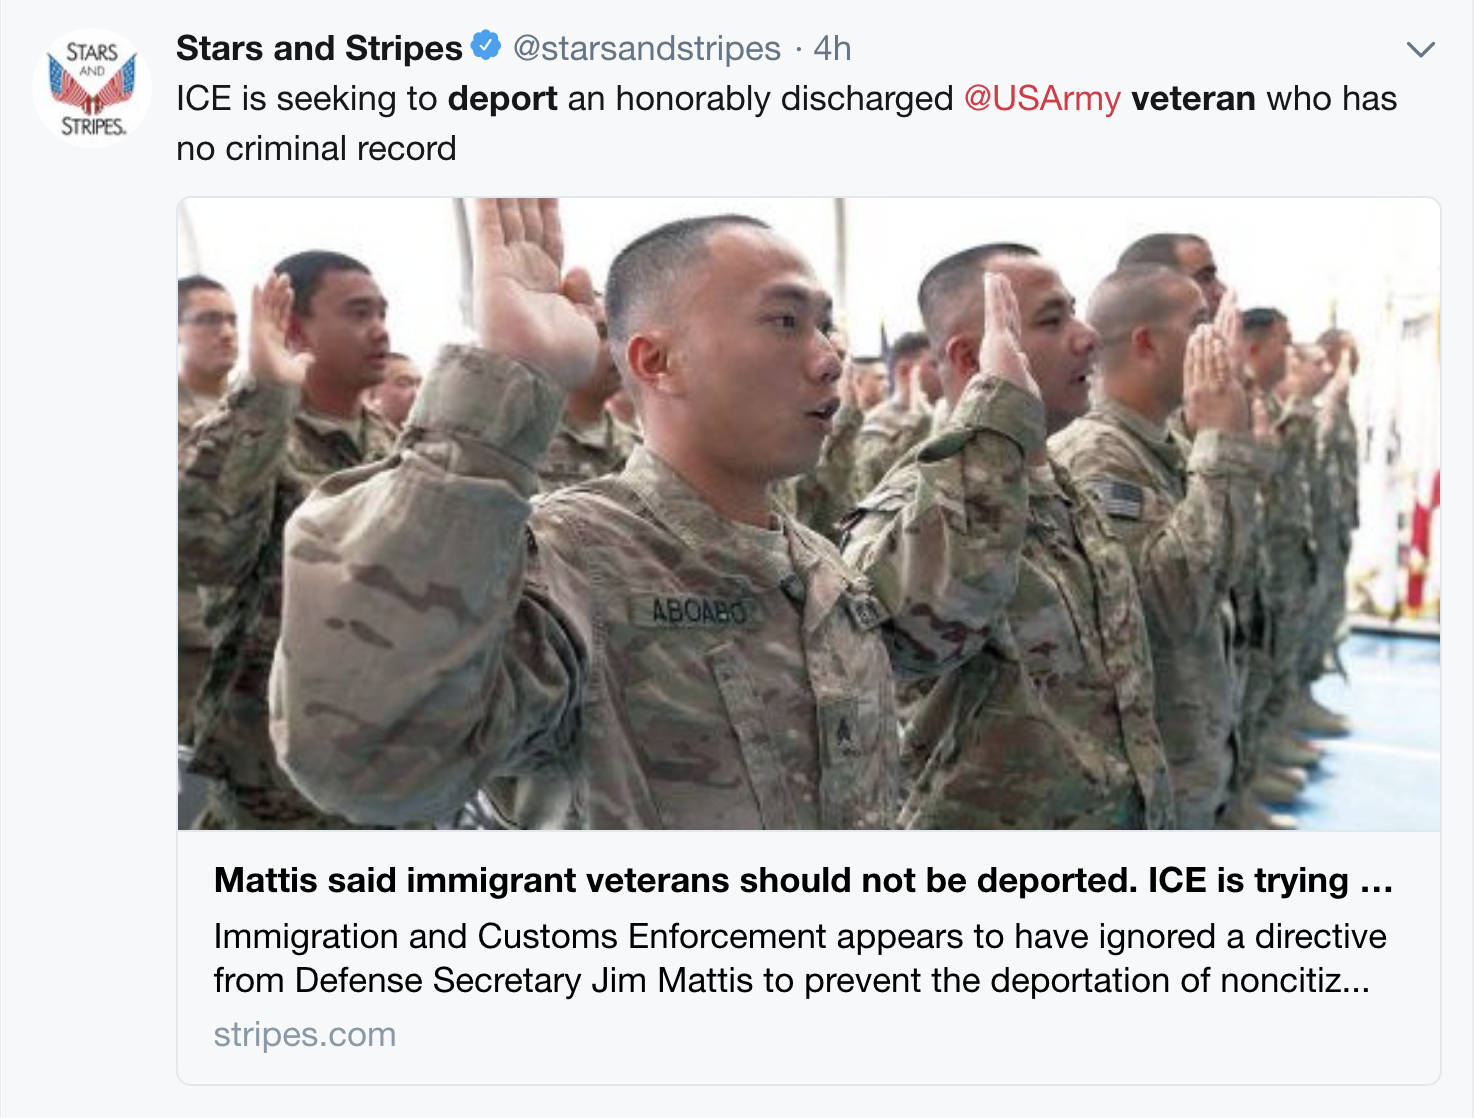 Screen-Shot-2018-04-04-at-12.39.07-PM I.C.E. Just Ignored Direct Orders From General Mattis - Veterans Remain Under Attack Corruption DACA Donald Trump Immigration Military Politics Top Stories 